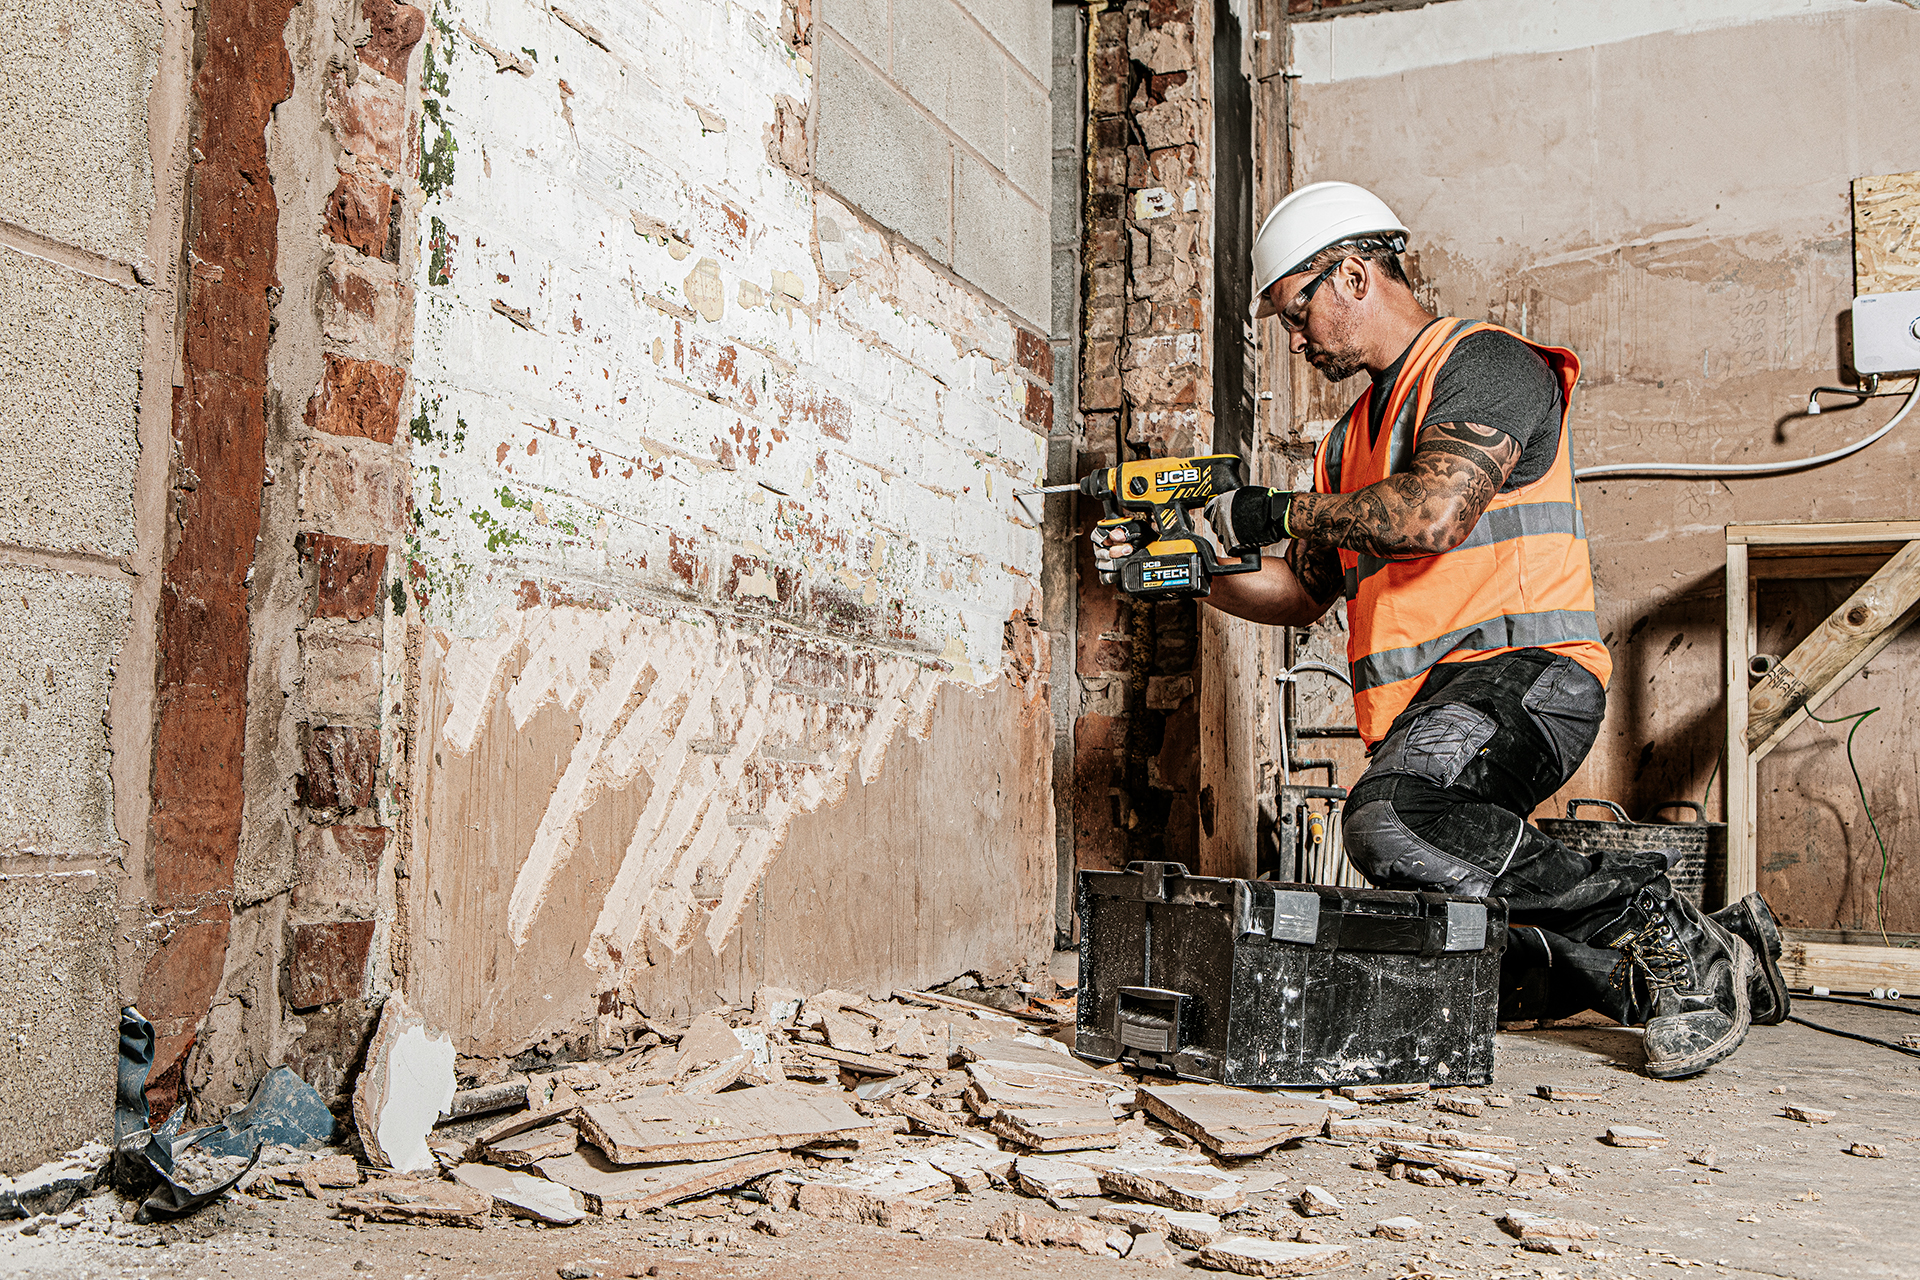 commercial-photography-for-jcb-tools